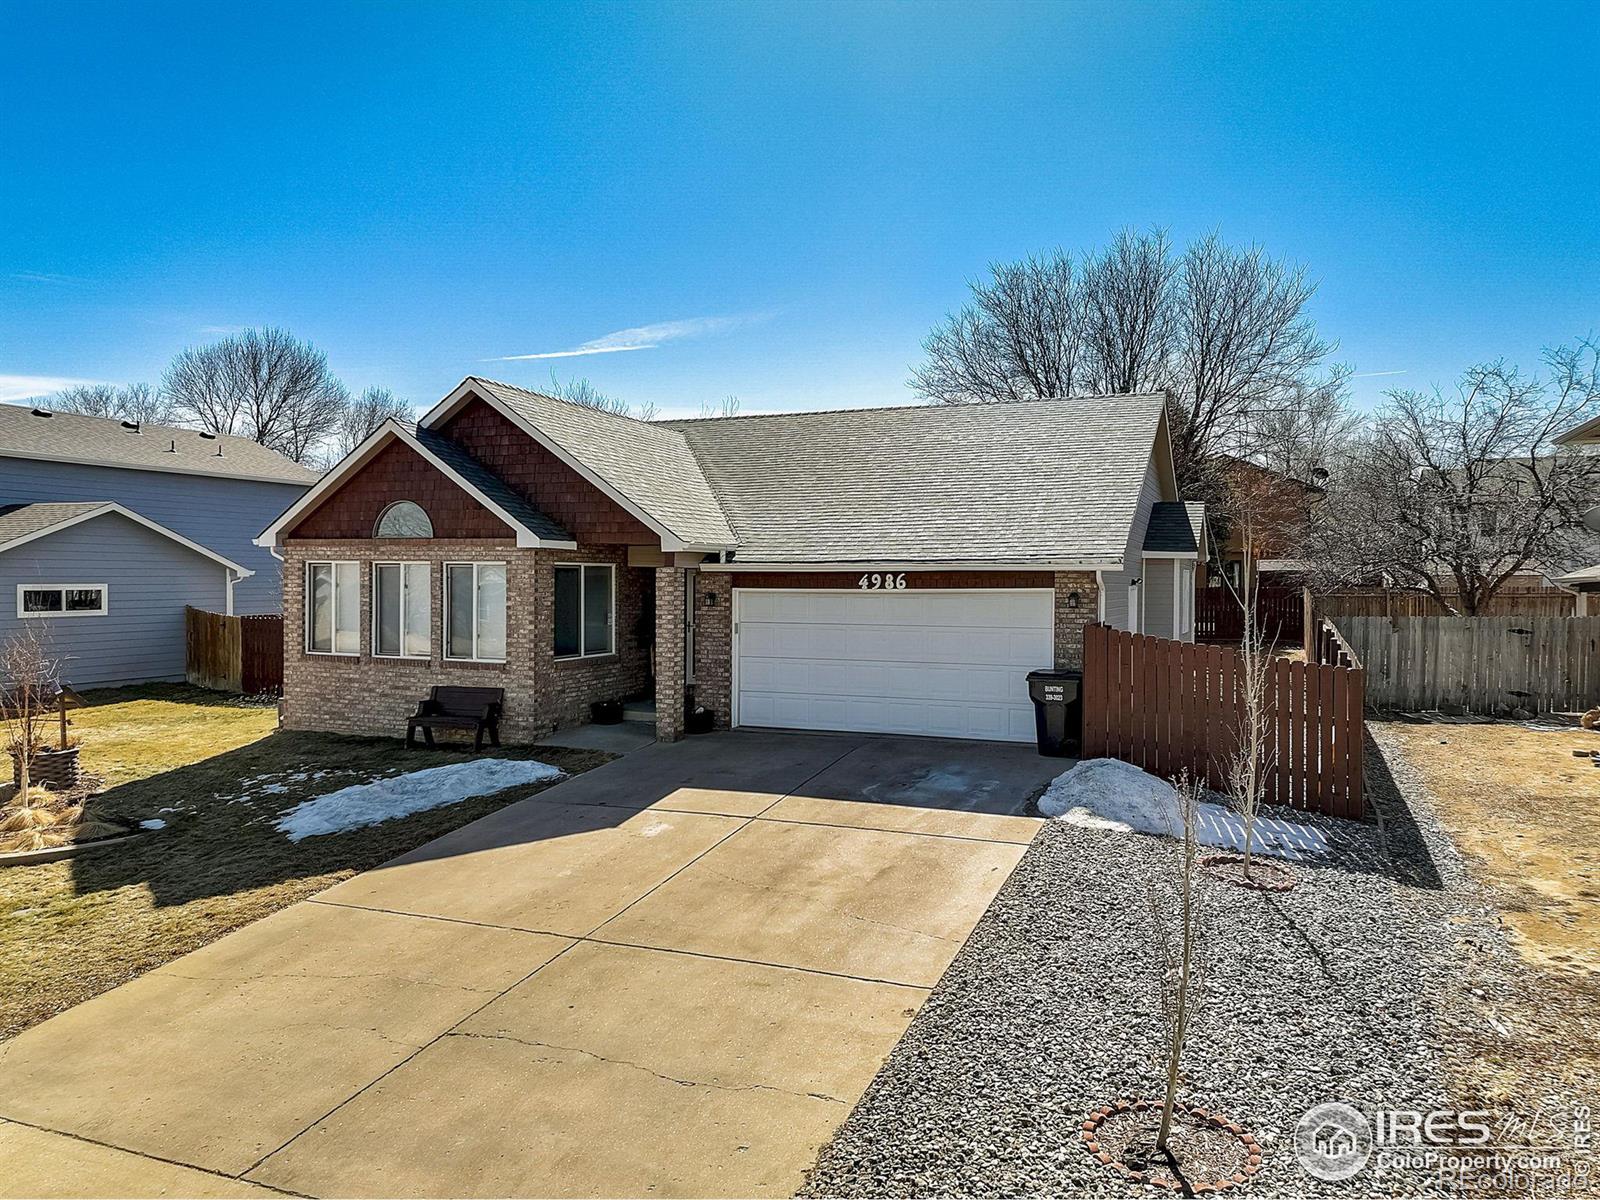 Report Image for 4986 W 5th Street,Greeley, Colorado